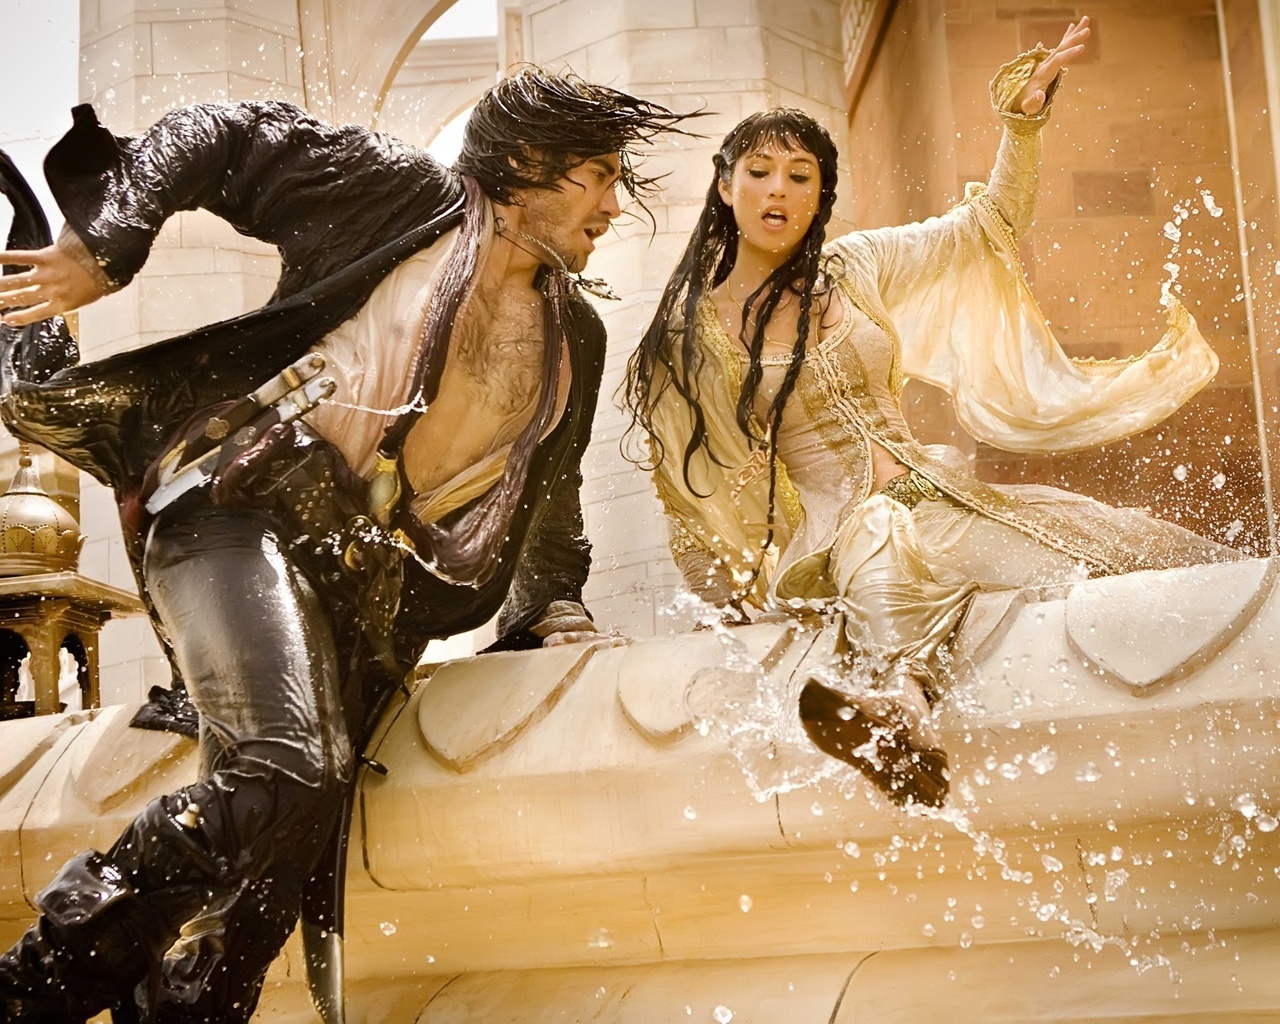 Prince Of Persia: The Sands of Time Movie for 1280 x 1024 resolution